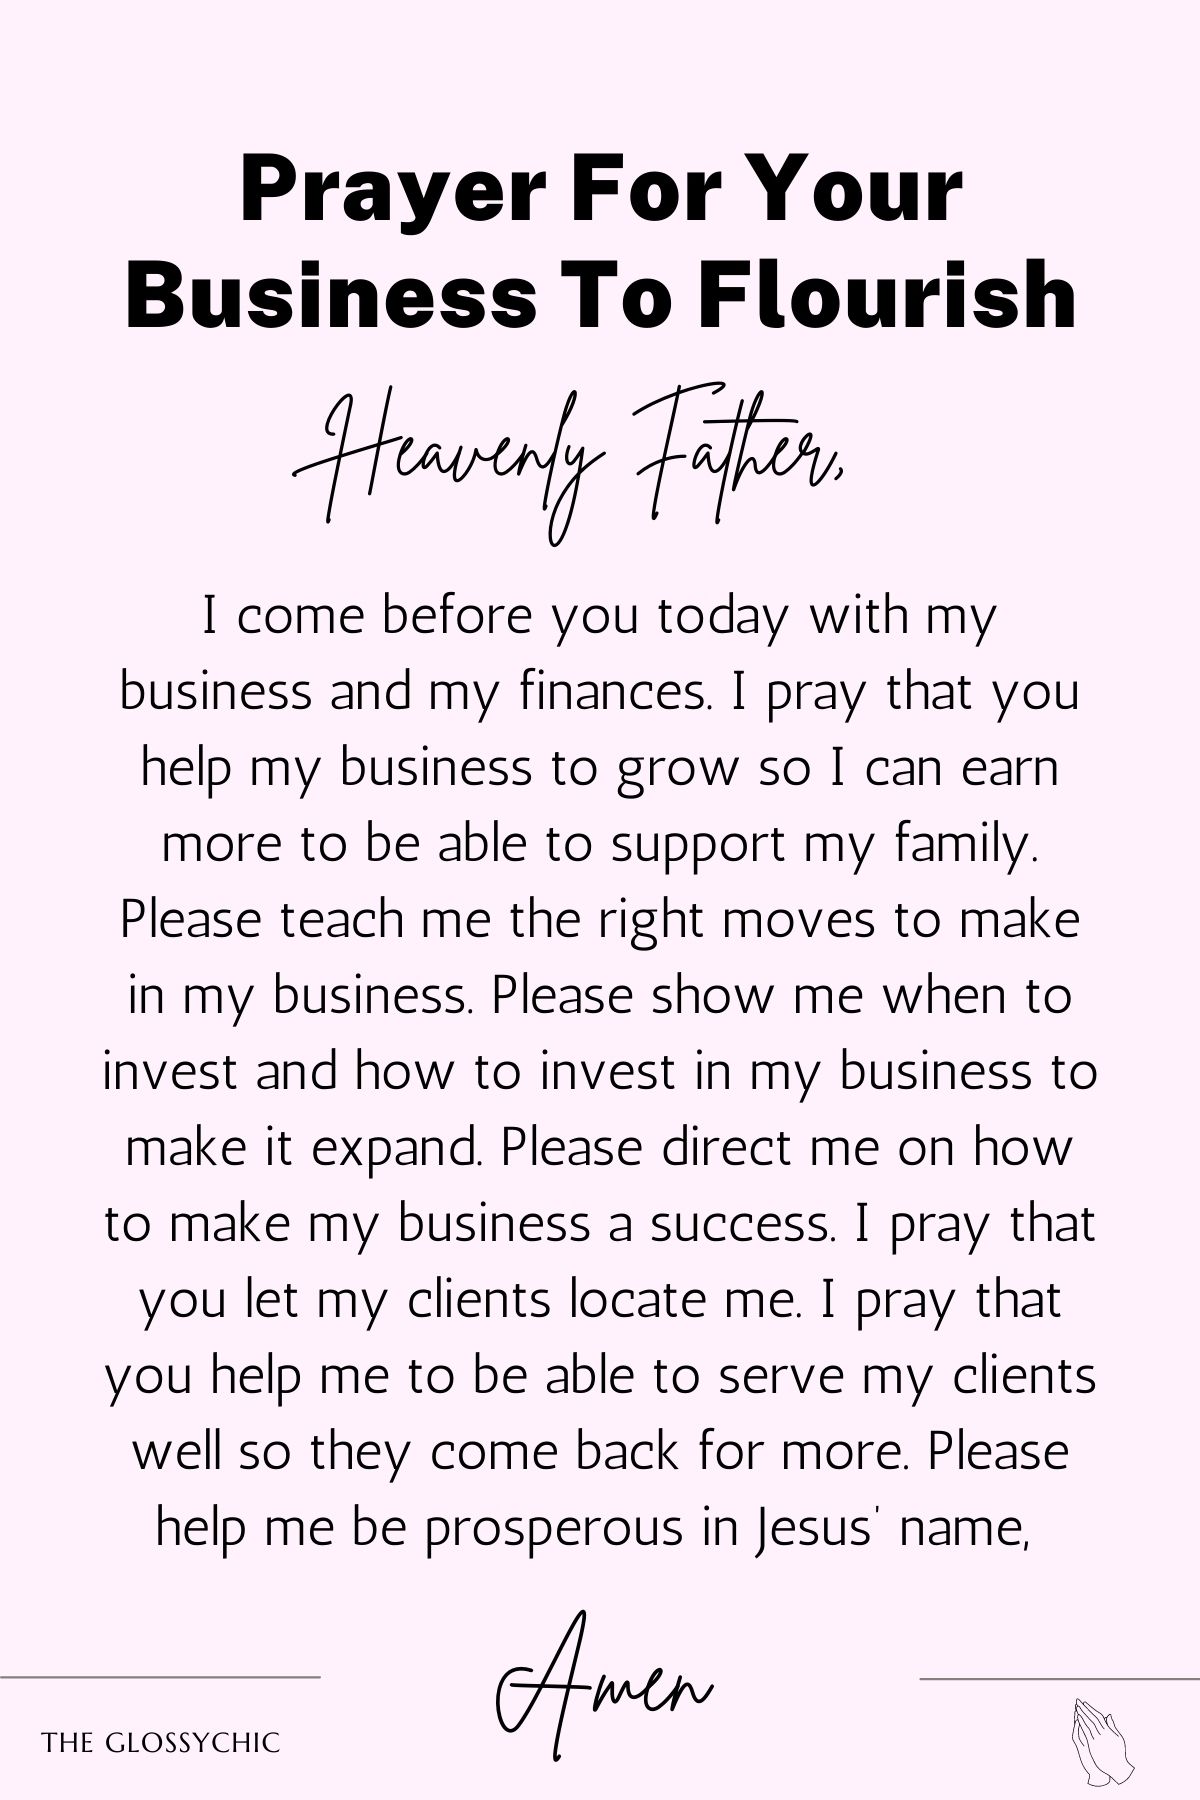 Prayer for your business to flourish